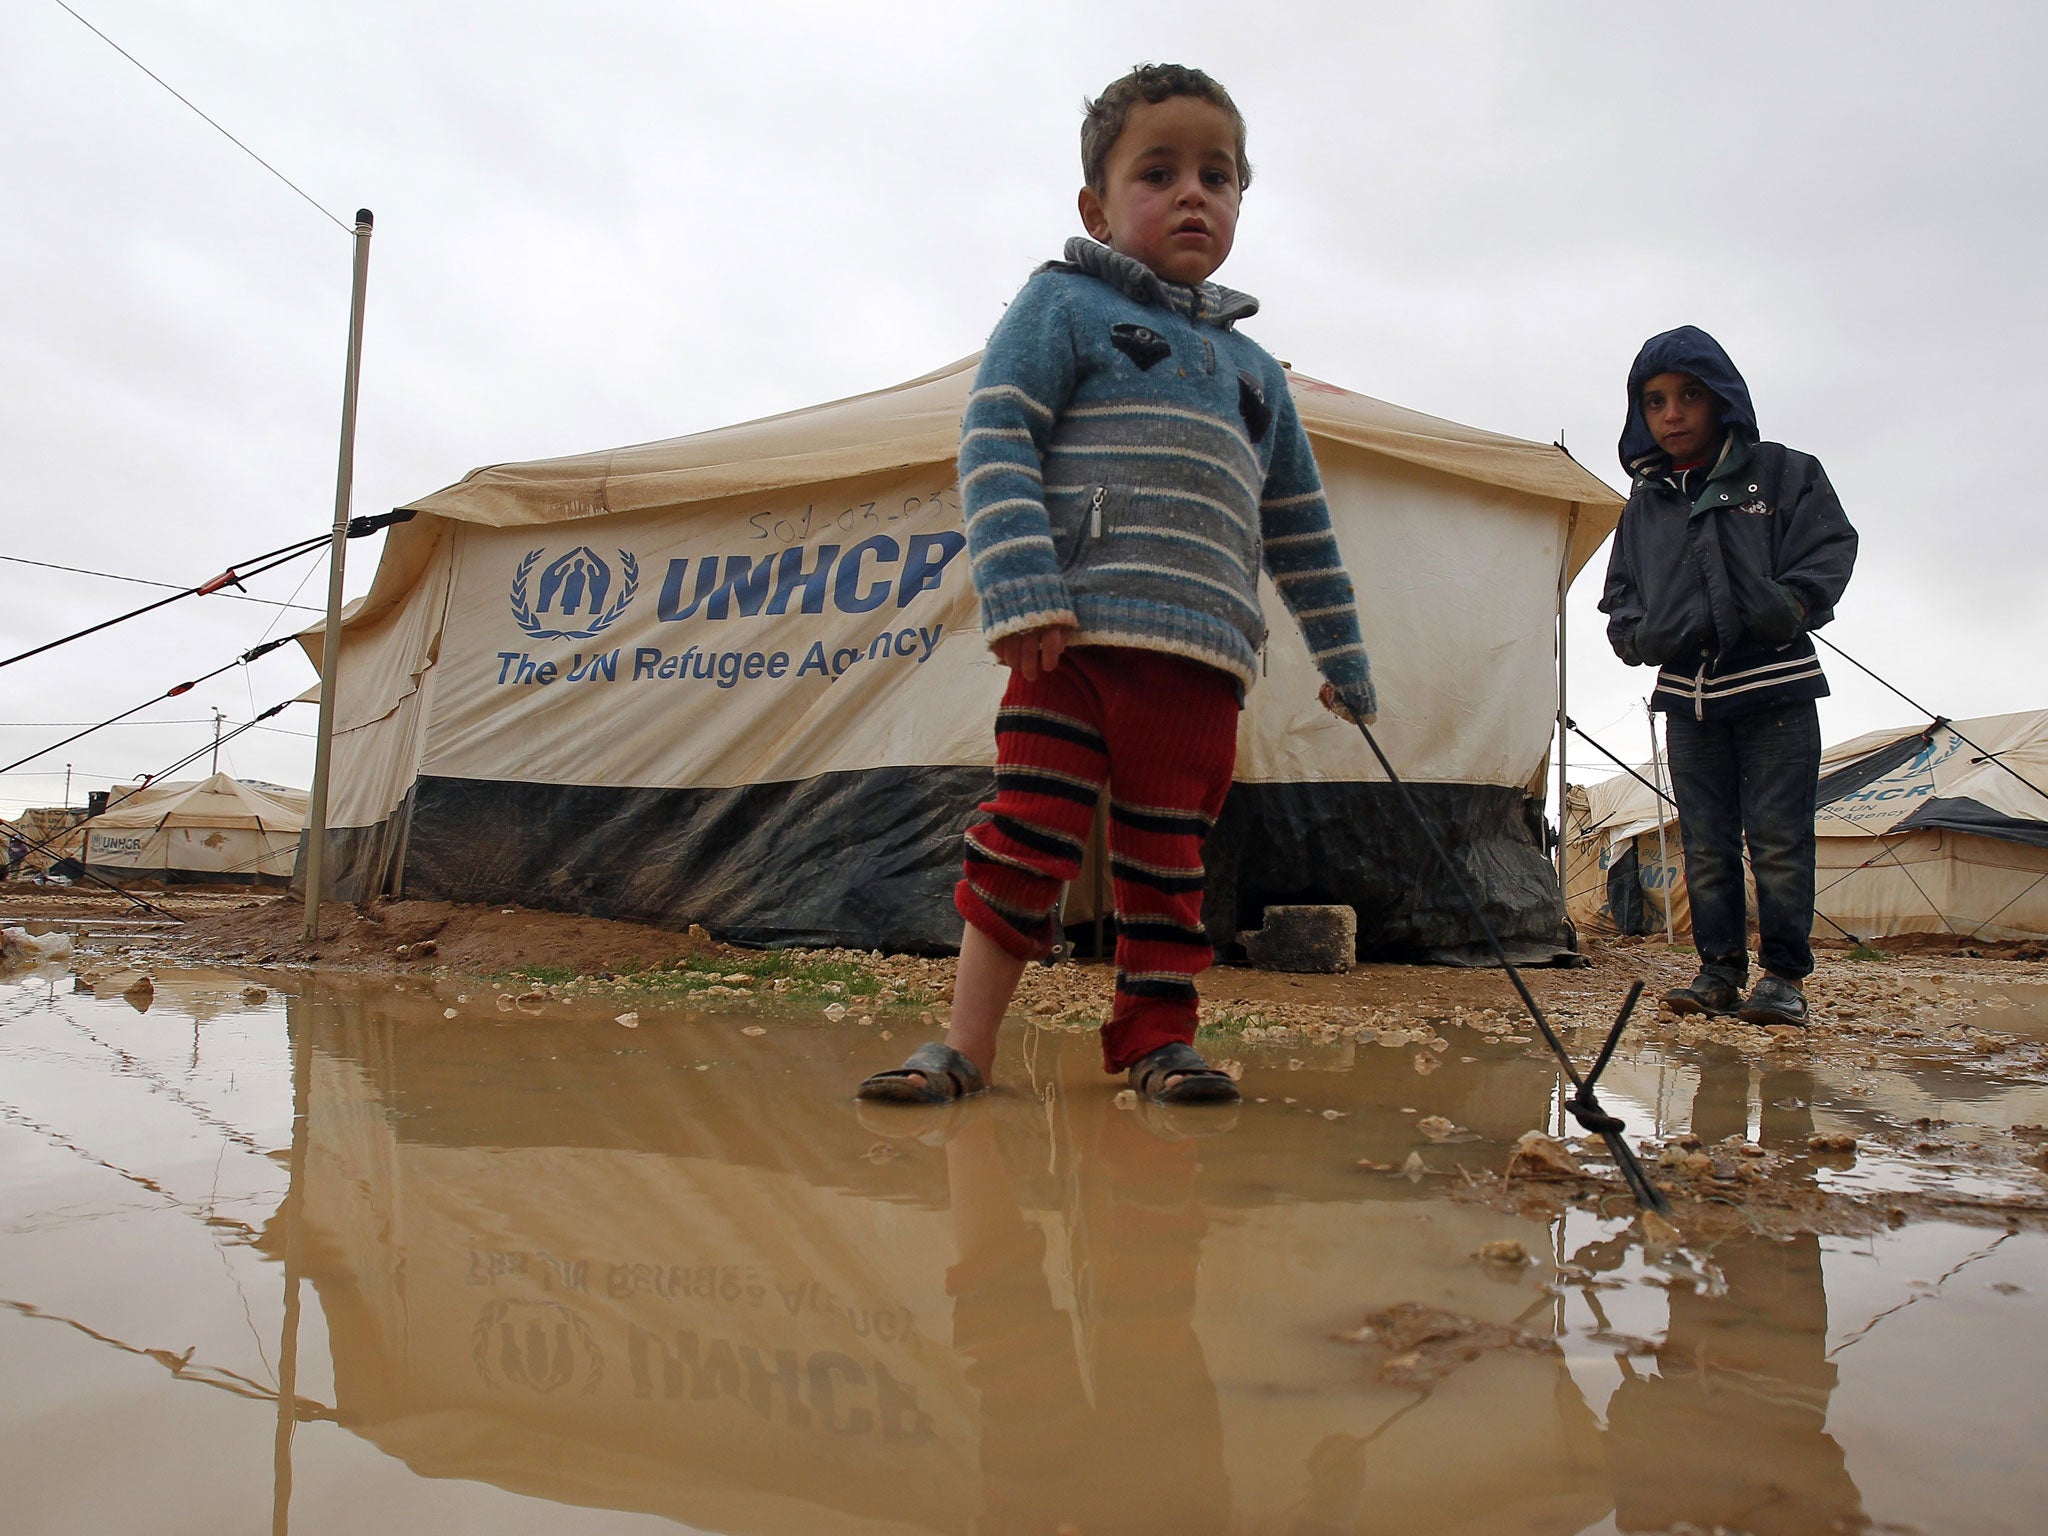 Growing lawlessness and disease in the Zaatari camp is forcing many refugees to return to Syria